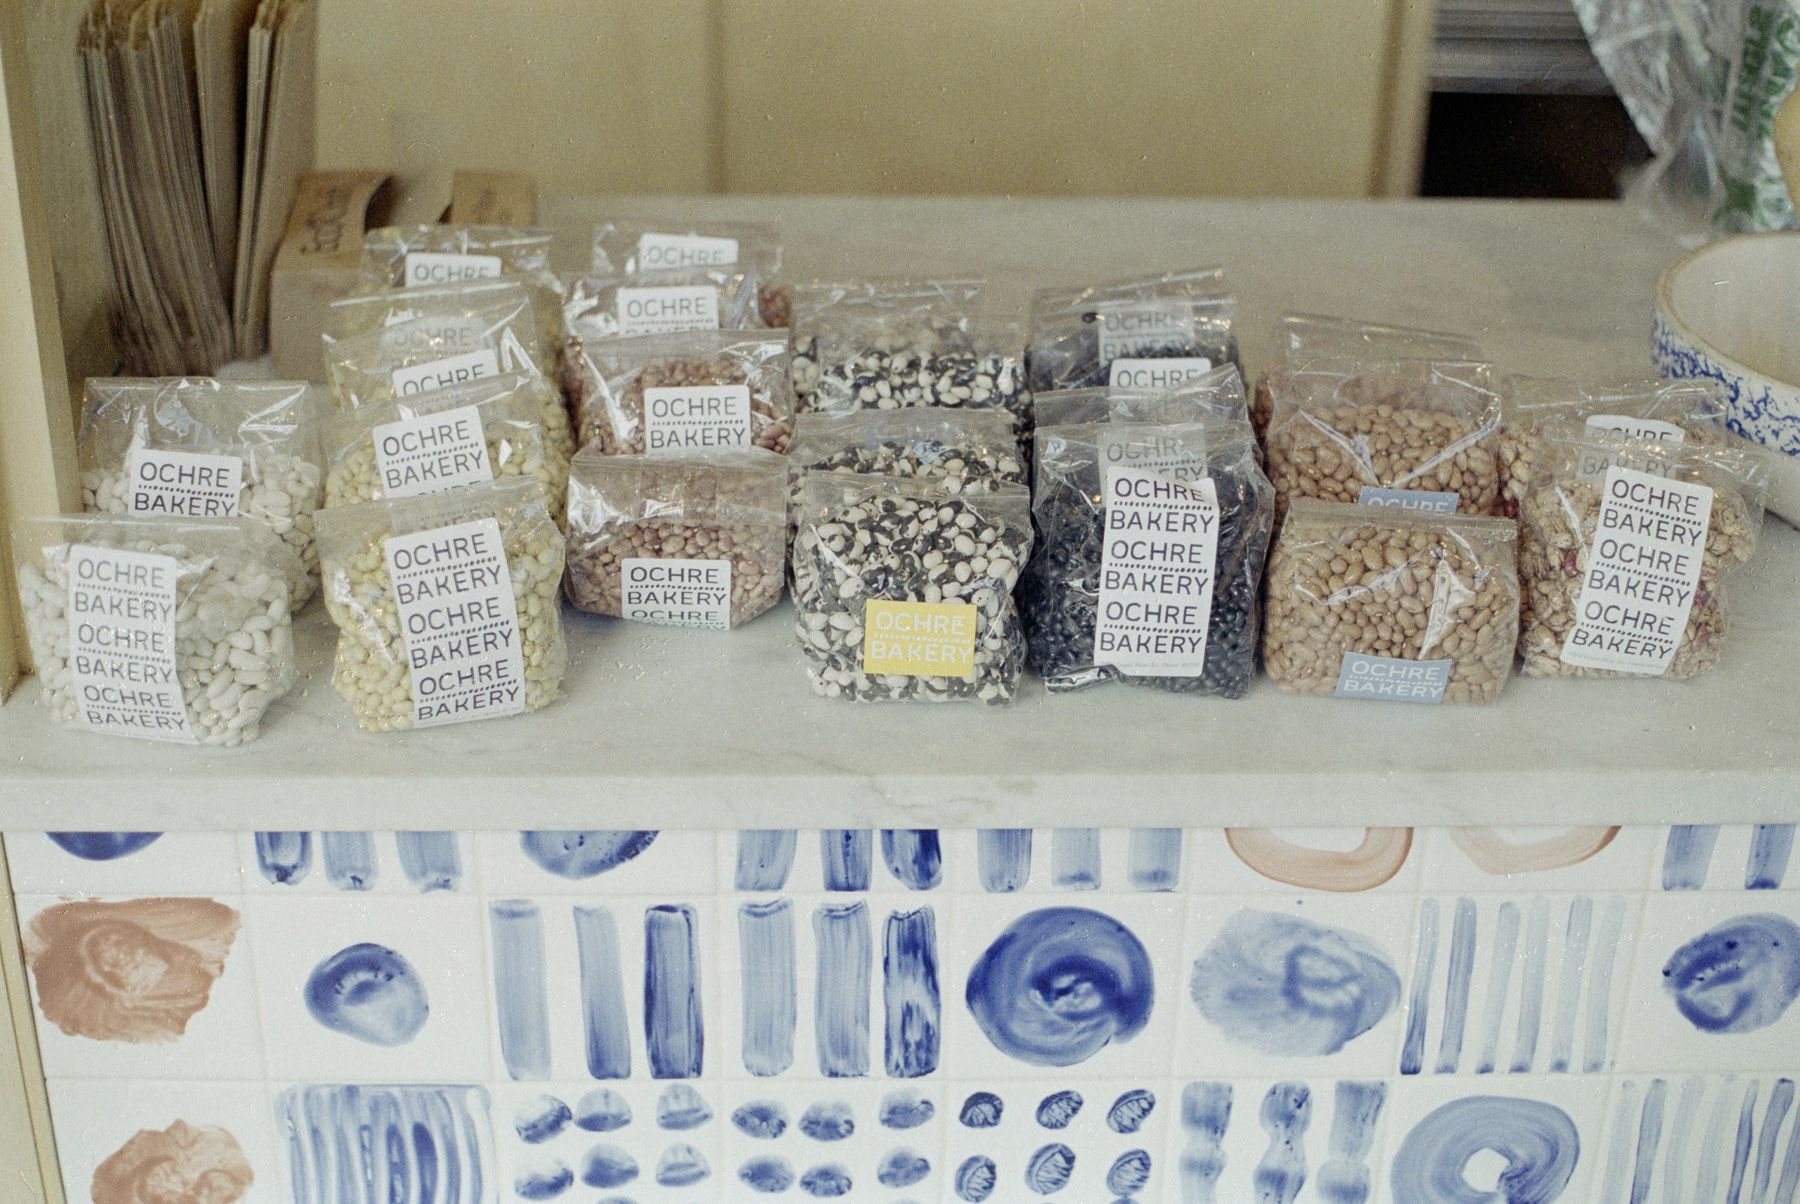 Dried beans in clear bags labeled Ochre Bakery, on marble counter with hand-painted tile front.